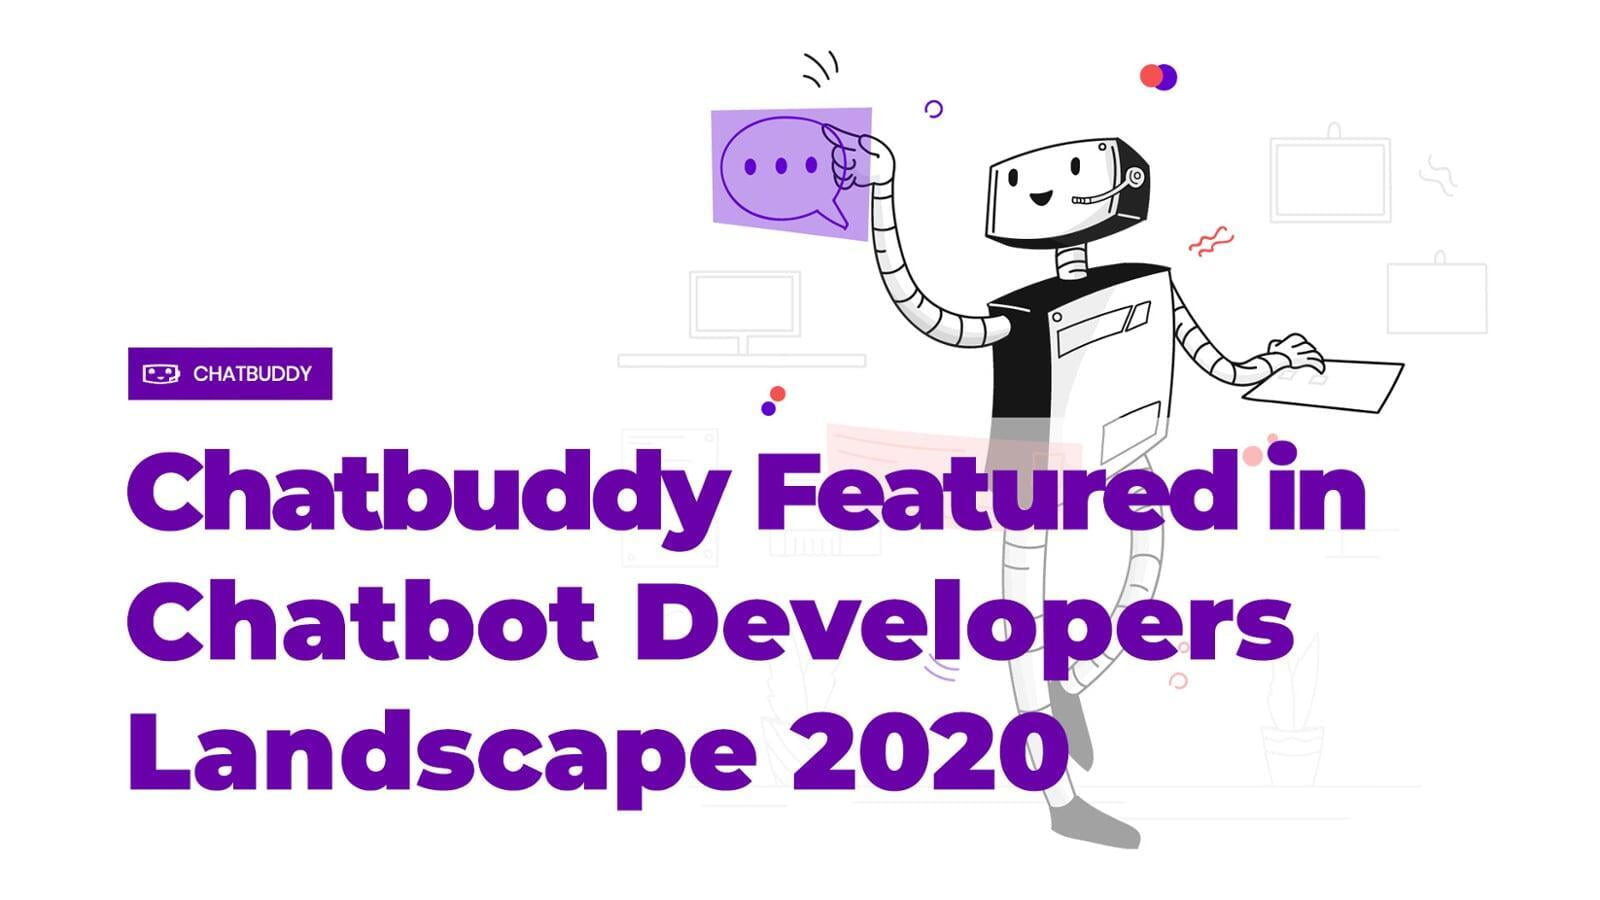 Chatbuddy Featured in Chatbot Developers Landscape 2020